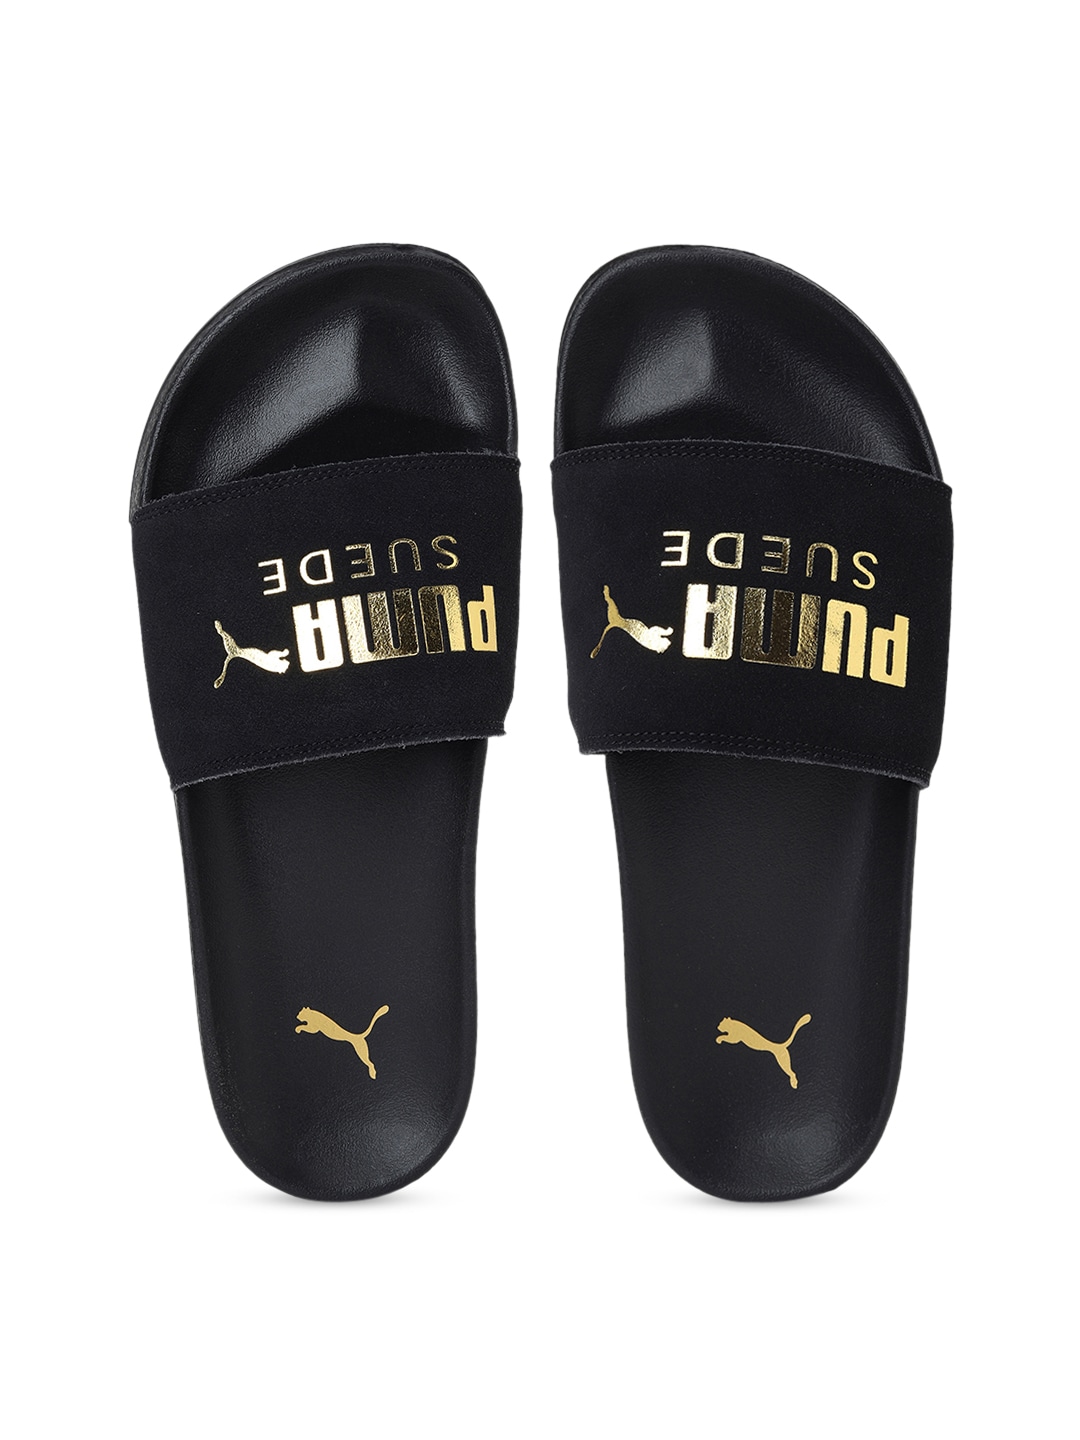 Puma Unisex Black  Gold-Toned Printed Leadcat FTR Suede Classic Sliders  Price in India, Full Specifications  Offers | DTashion.com